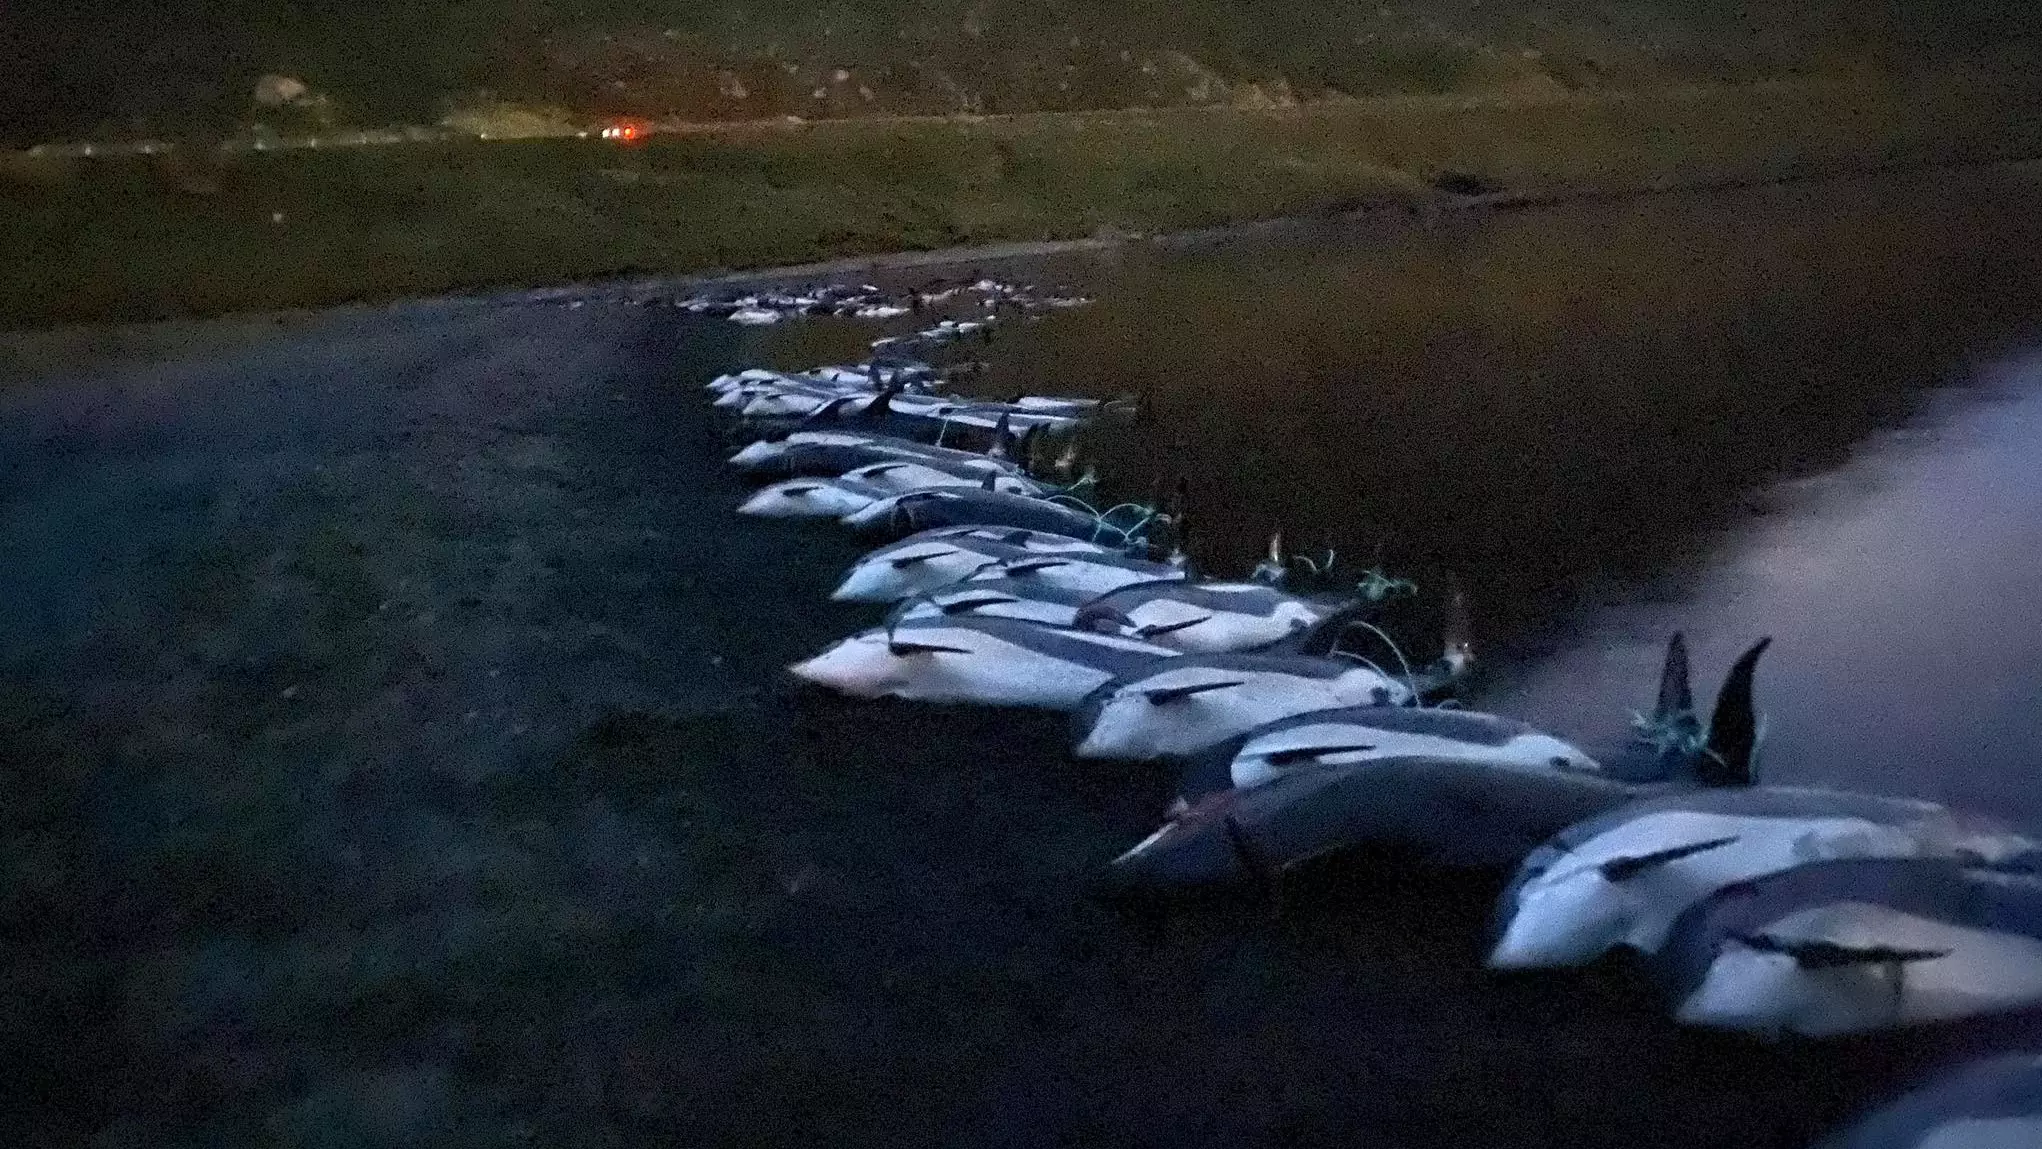 1,400 Dolphins Killed In Single Day During Annual Faroe Islands Hunt